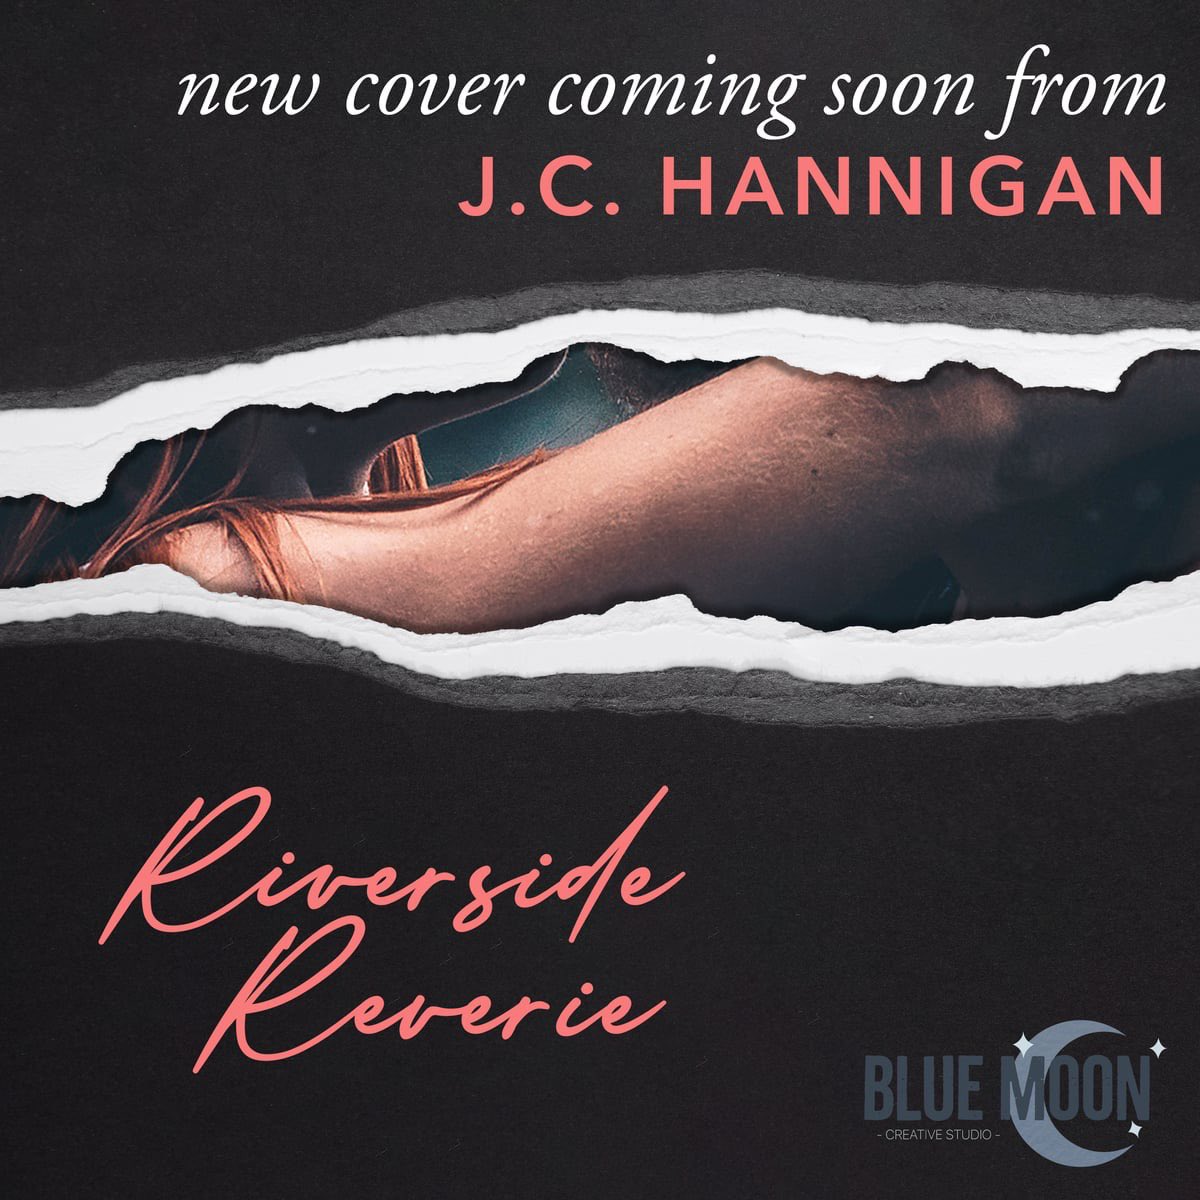 The cover reveal for 𝑹𝒊𝒗𝒆𝒓𝒔𝒊𝒅𝒆 𝑹𝒆𝒗𝒆𝒓𝒊𝒆 is happening SOON!

Subscribe to my newsletter for the cover reveal, exclusive excerpt, & release day details 👉 subscribepage.com/jchannigannews…

#CoverReveal #ComingSoon #RomanceBooks #CampingVibes #SummerRomance #SmallTownRomance